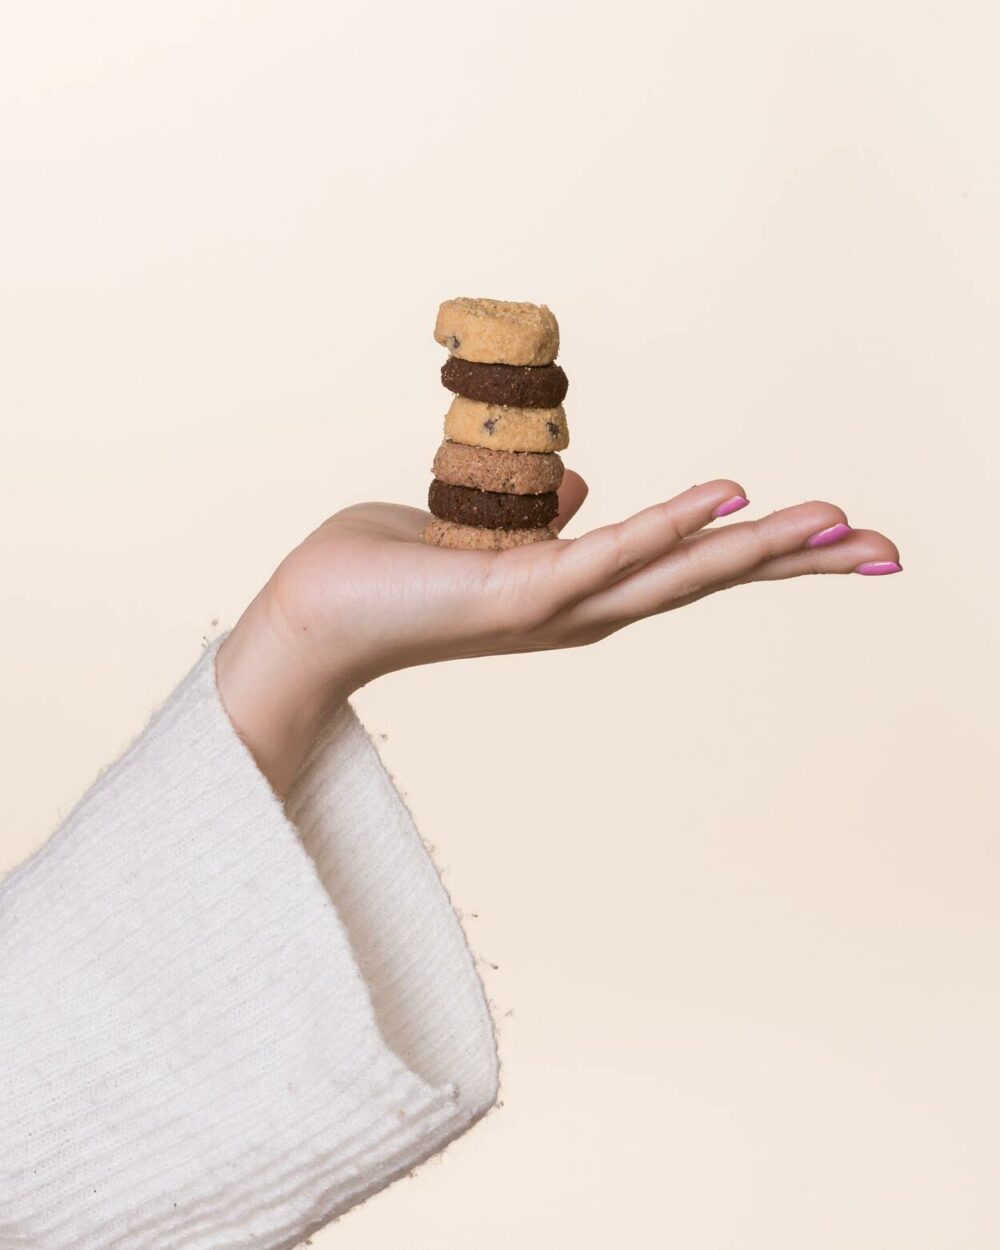 Girl scout cookies placed on a hand